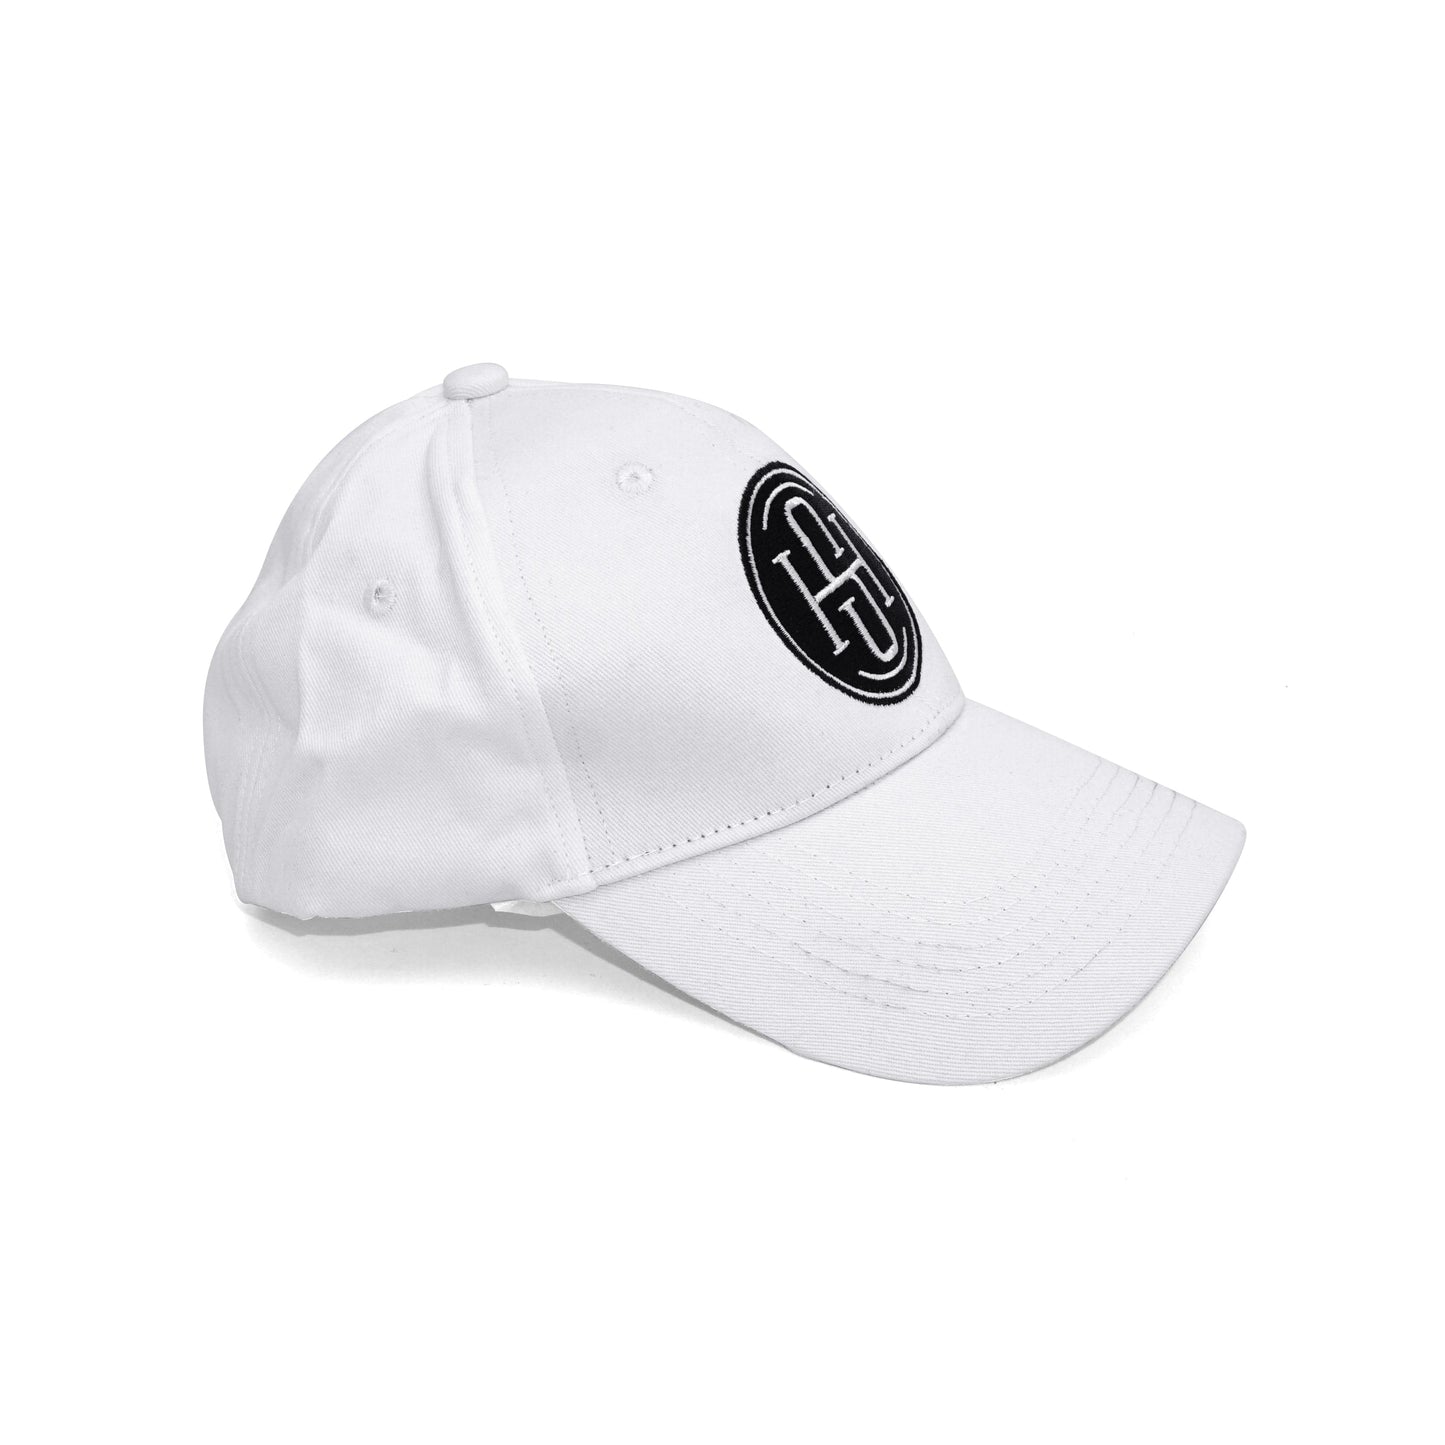 High Society High Society Limited Edition Snap Back - White